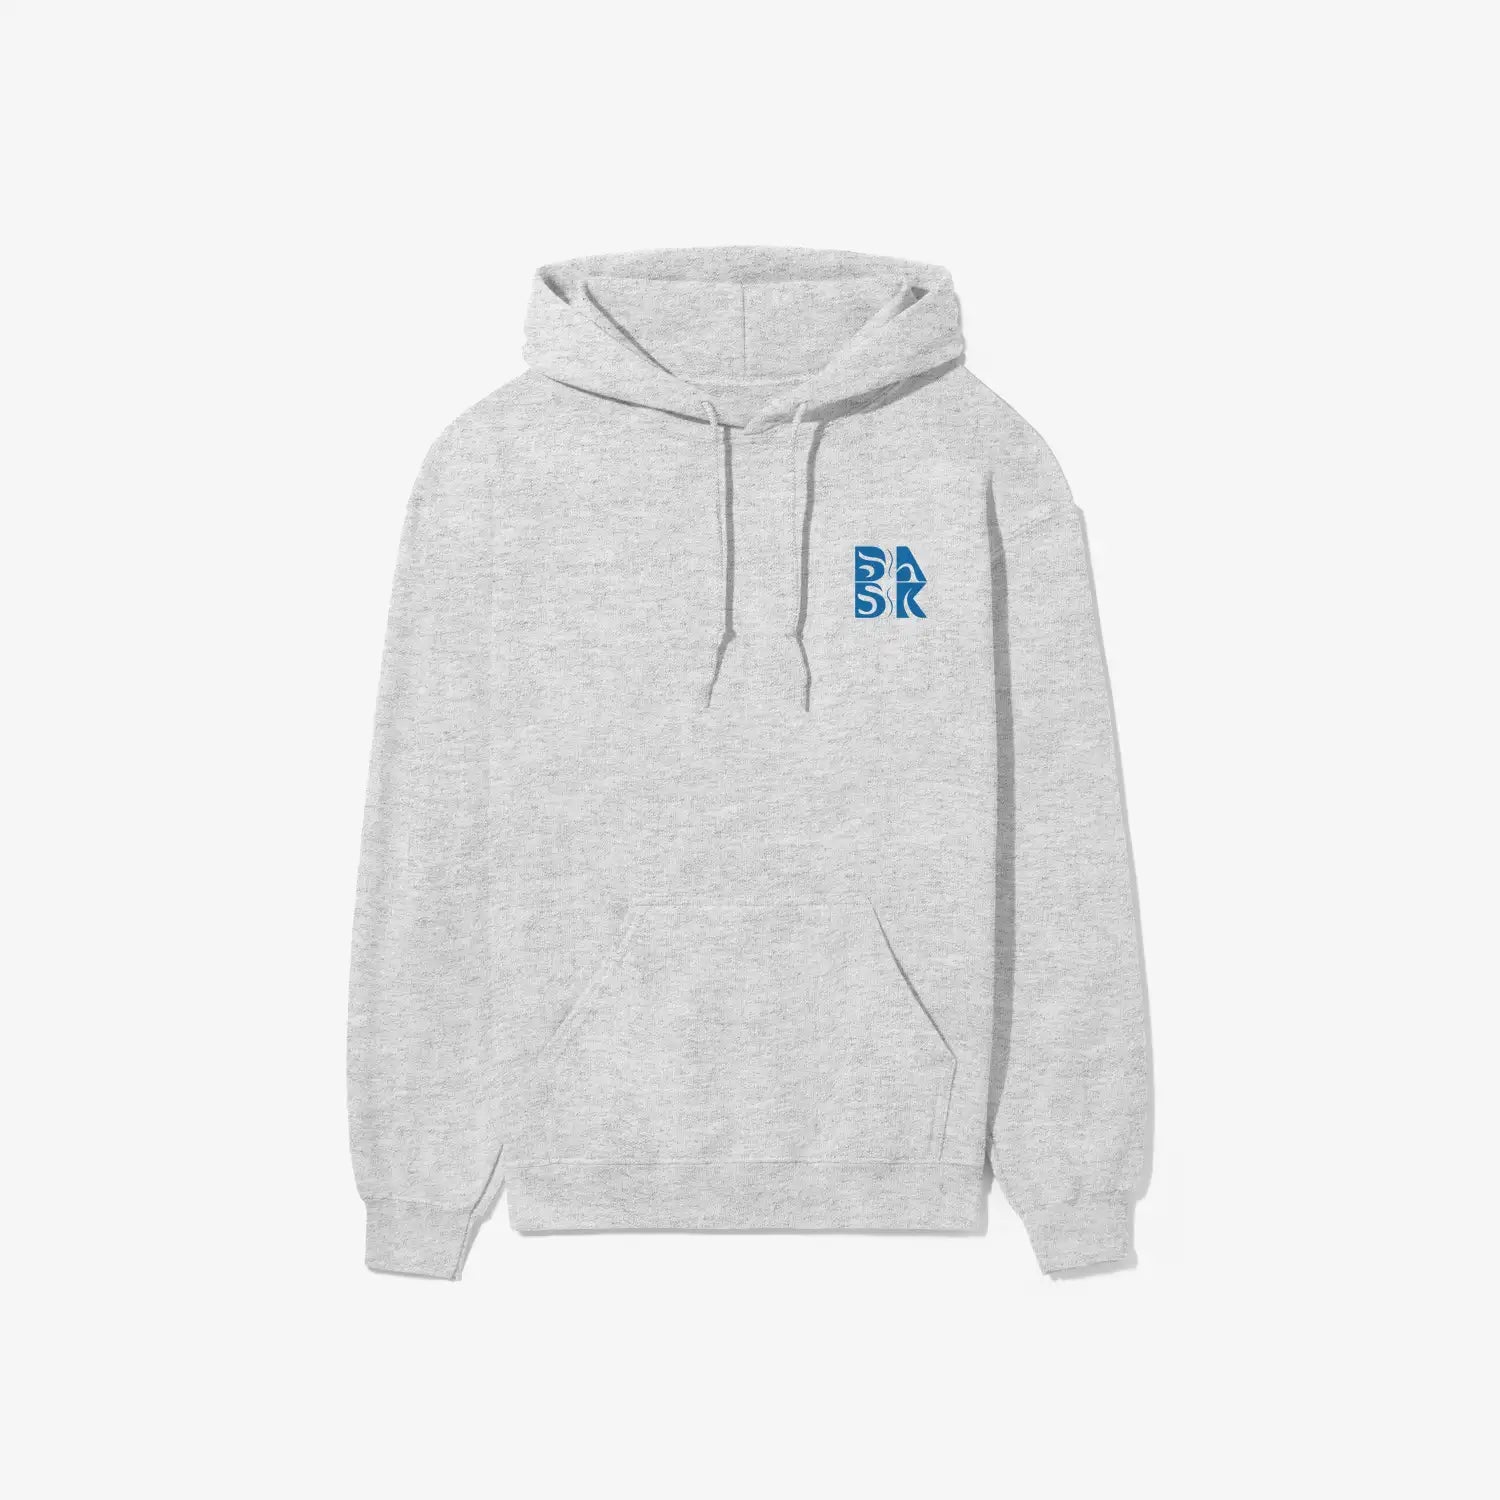 The Be Still and Know Kupa'a Tide Hoodie combines the timeless appeal of a grey hoodie with the vibrant addition of blue letters, creating a stylish and impactful look.